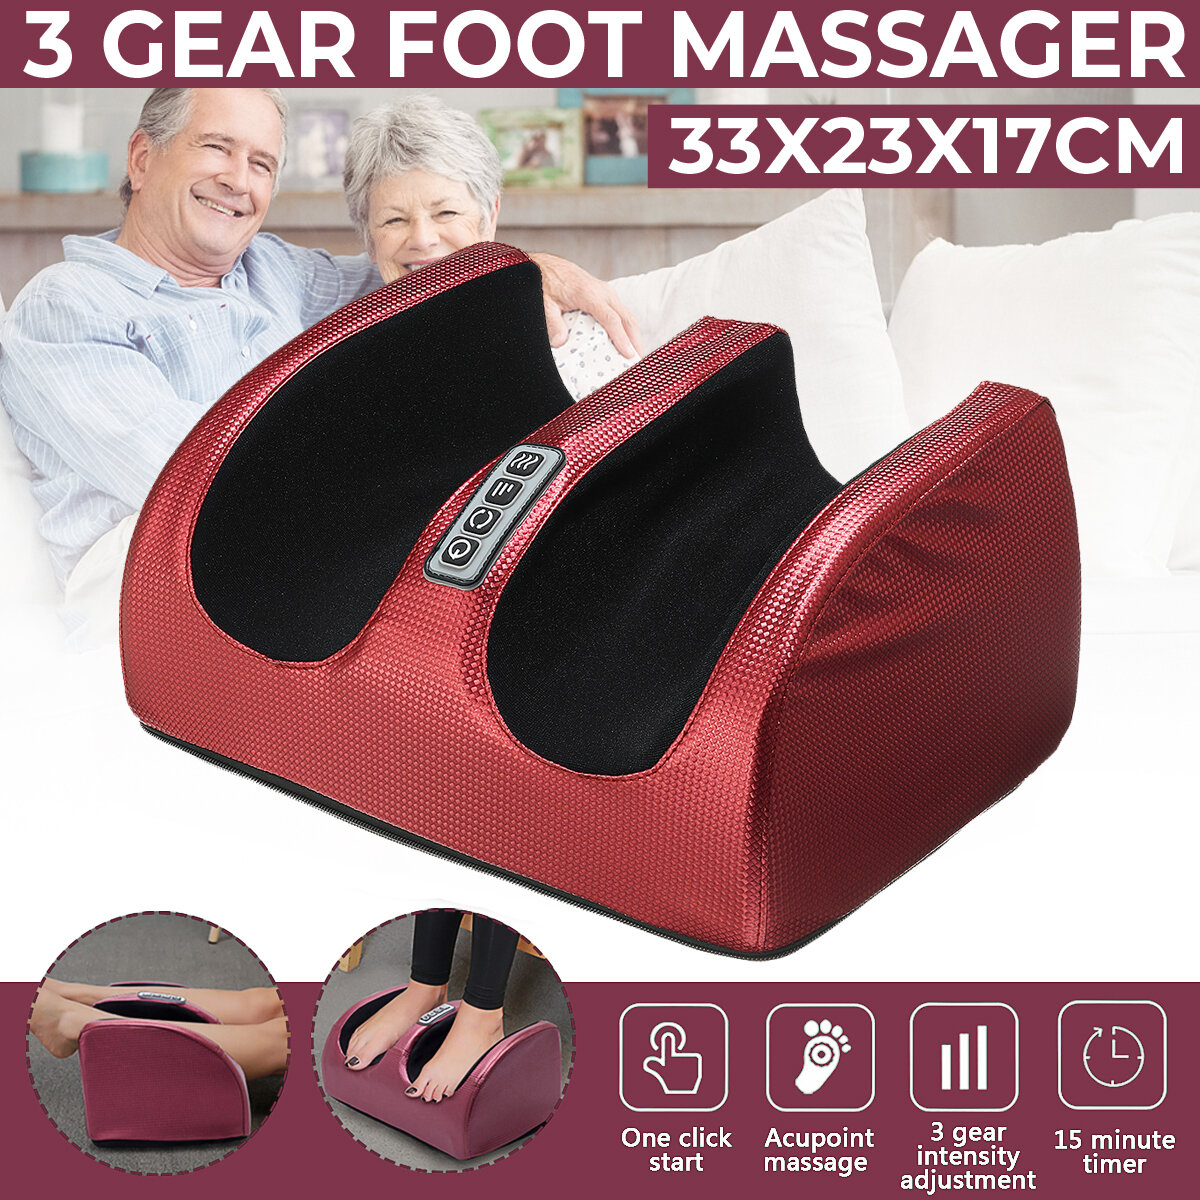 

Electric Heating Foot Massager Machine Muscle Relaxation Leg Massager Kneading Blood Circulation Heat Therapy Massage In